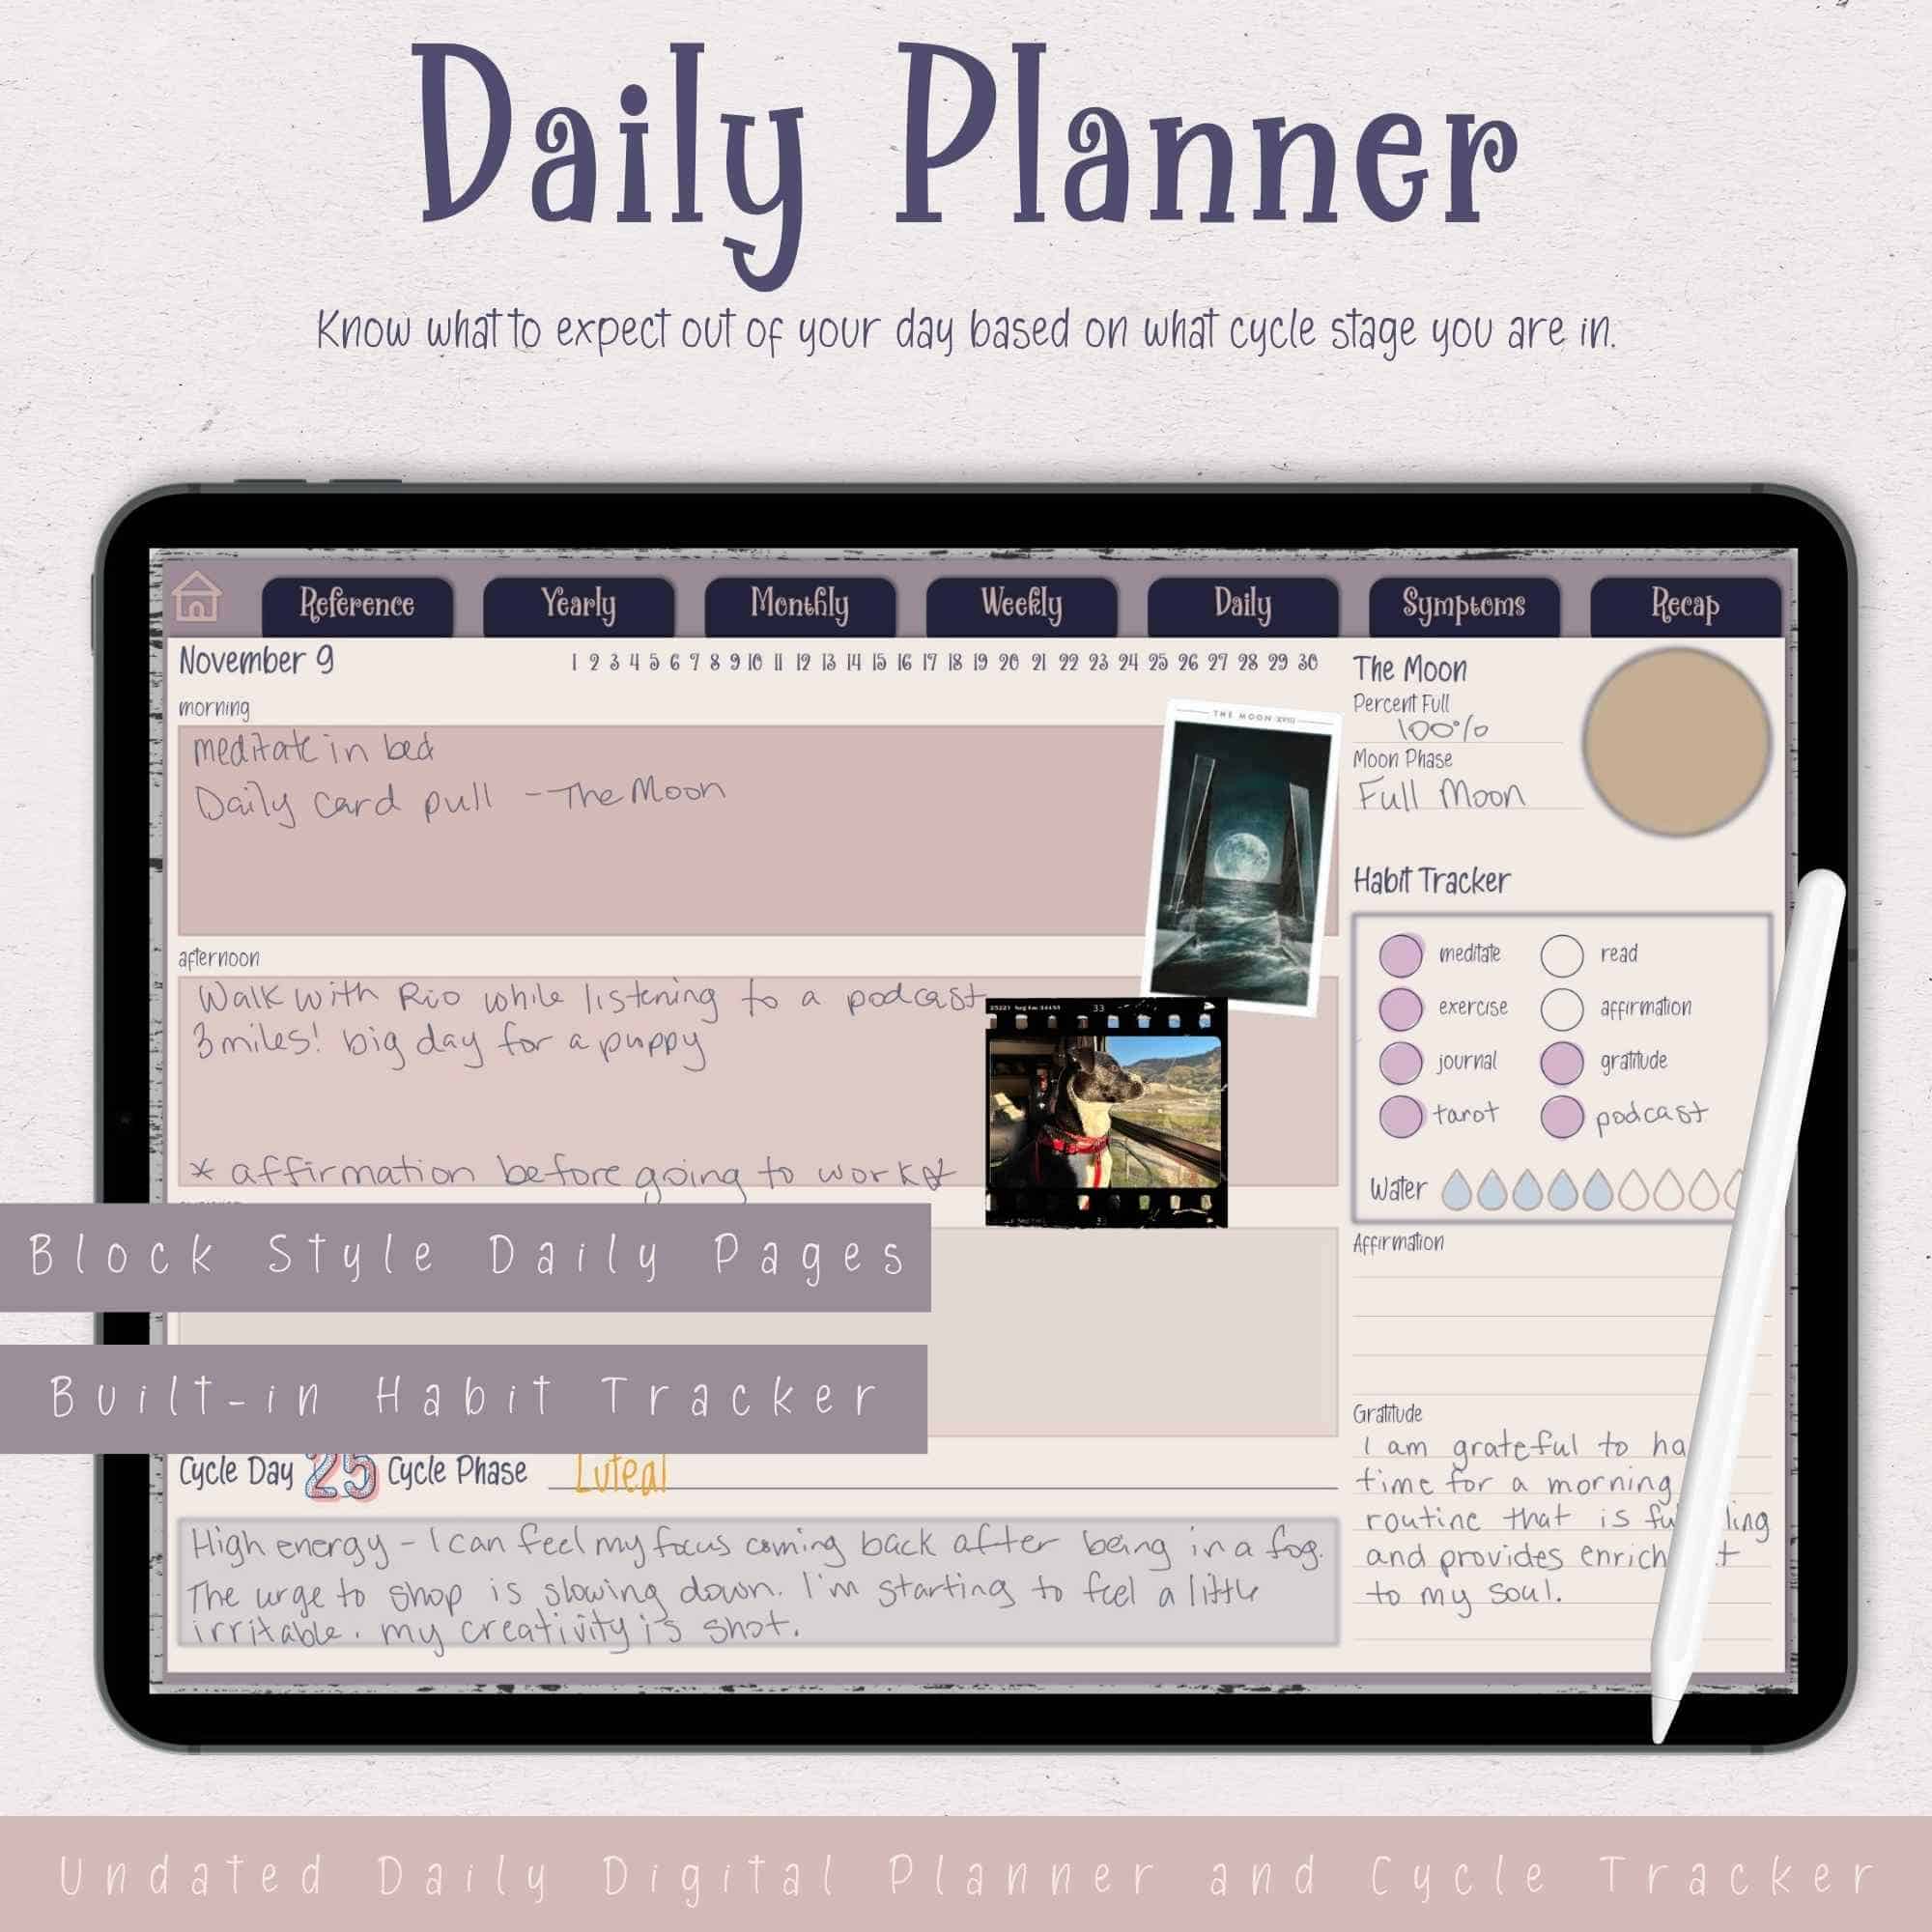 A digital cycle syncing daily planner being shown in use with a daily planner layout on display in cream and rose colors.